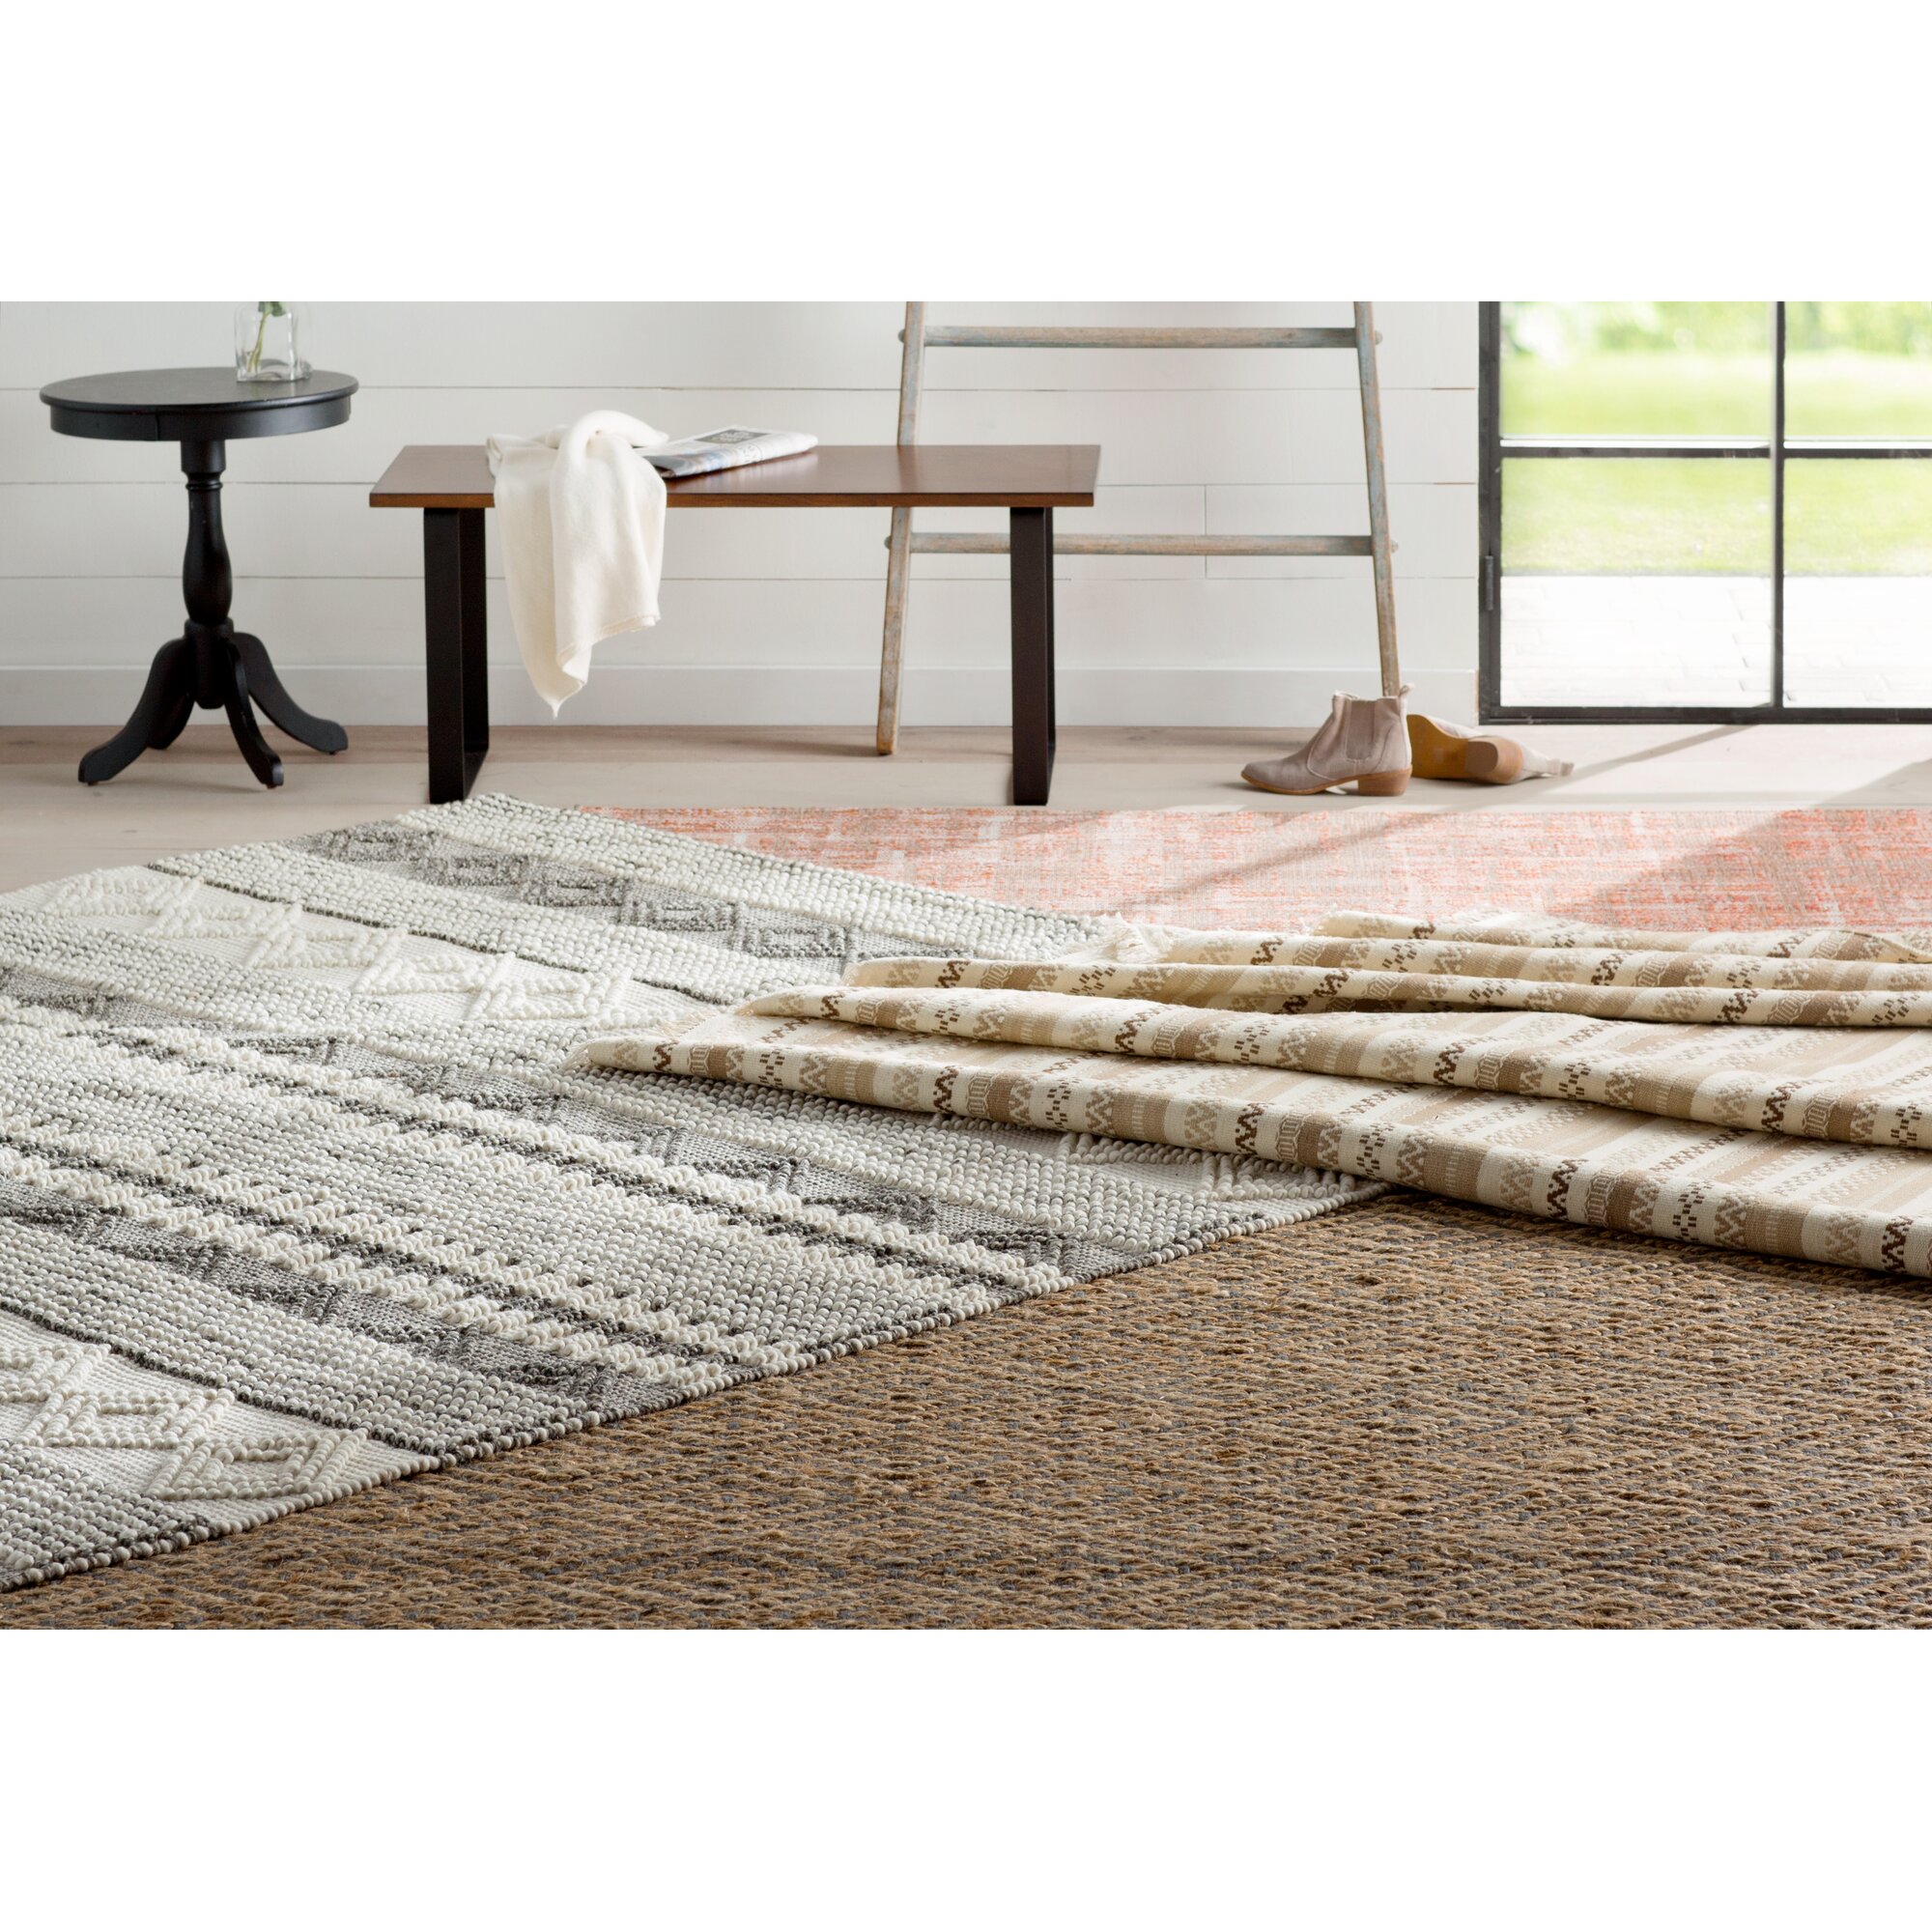  Modern Farmhouse Decor Rugs for Large Space